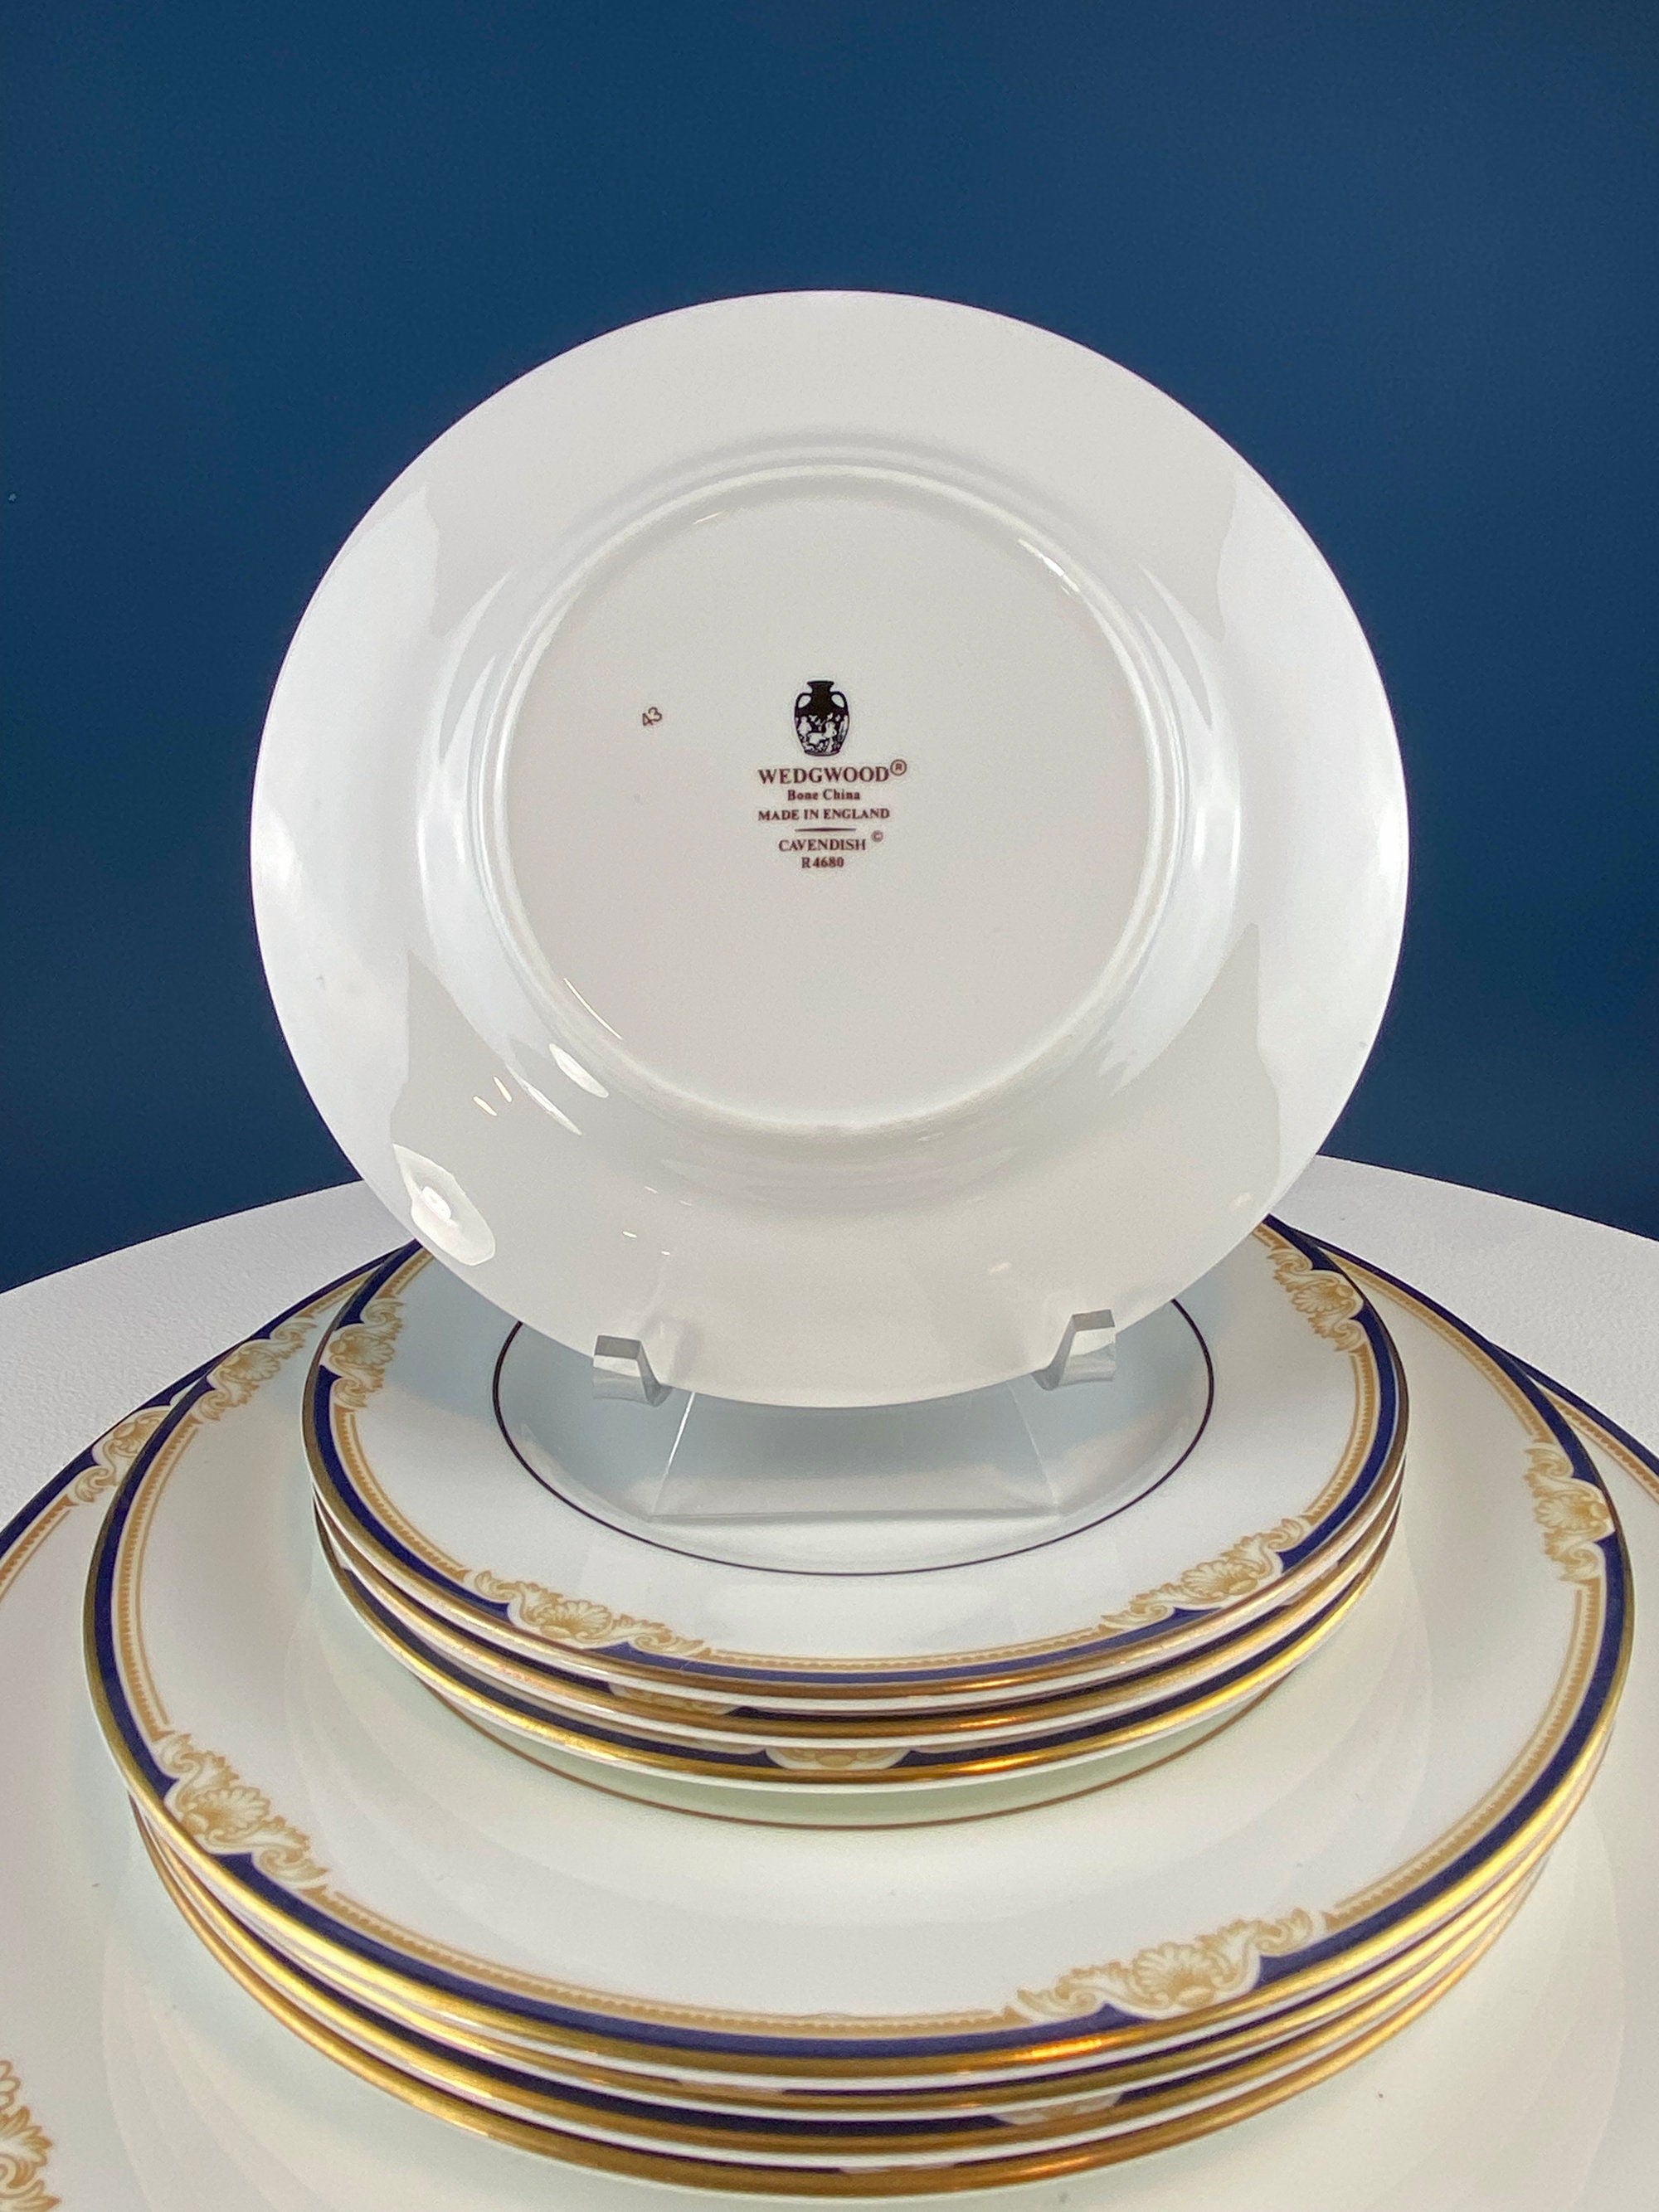 Classic Wedgewood Cavendish Classic Dinnerware Set. 4 Settings: Dinner,  Salad, Dessert/Bread Plates, Cups and Saucers. 20 piece China.